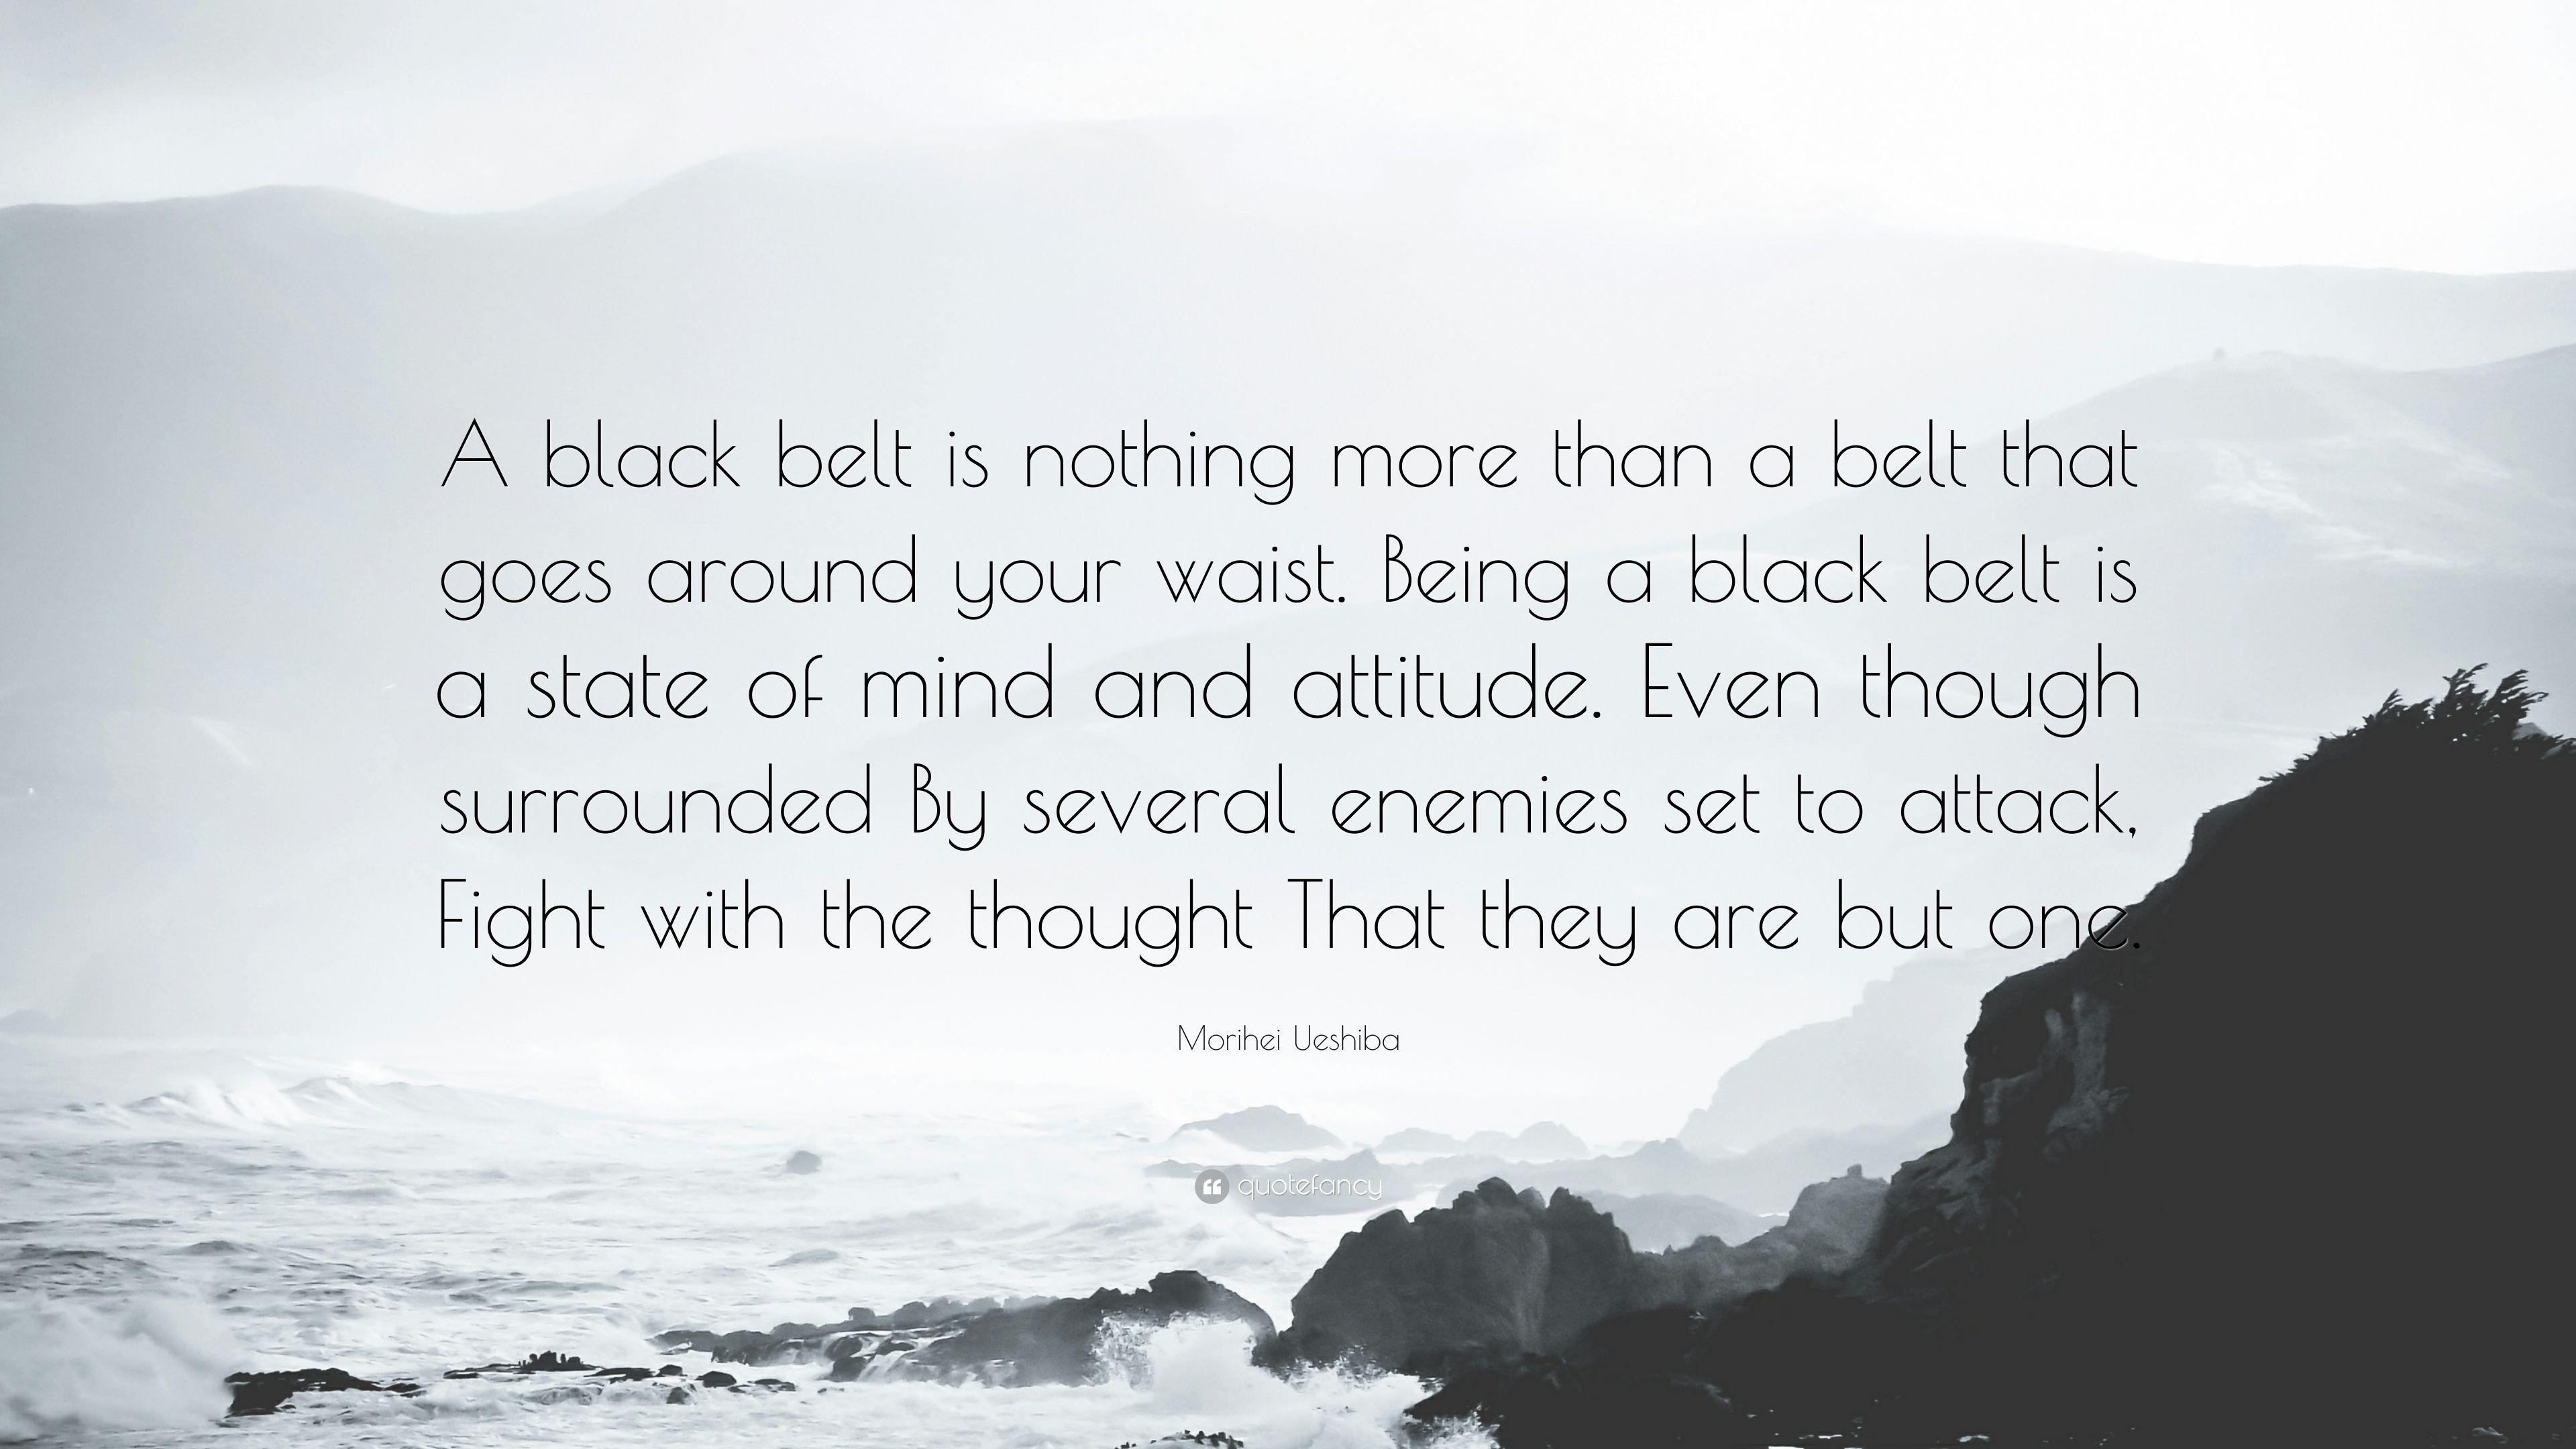 Morihei Ueshiba Quote: “A black belt is nothing more than a belt